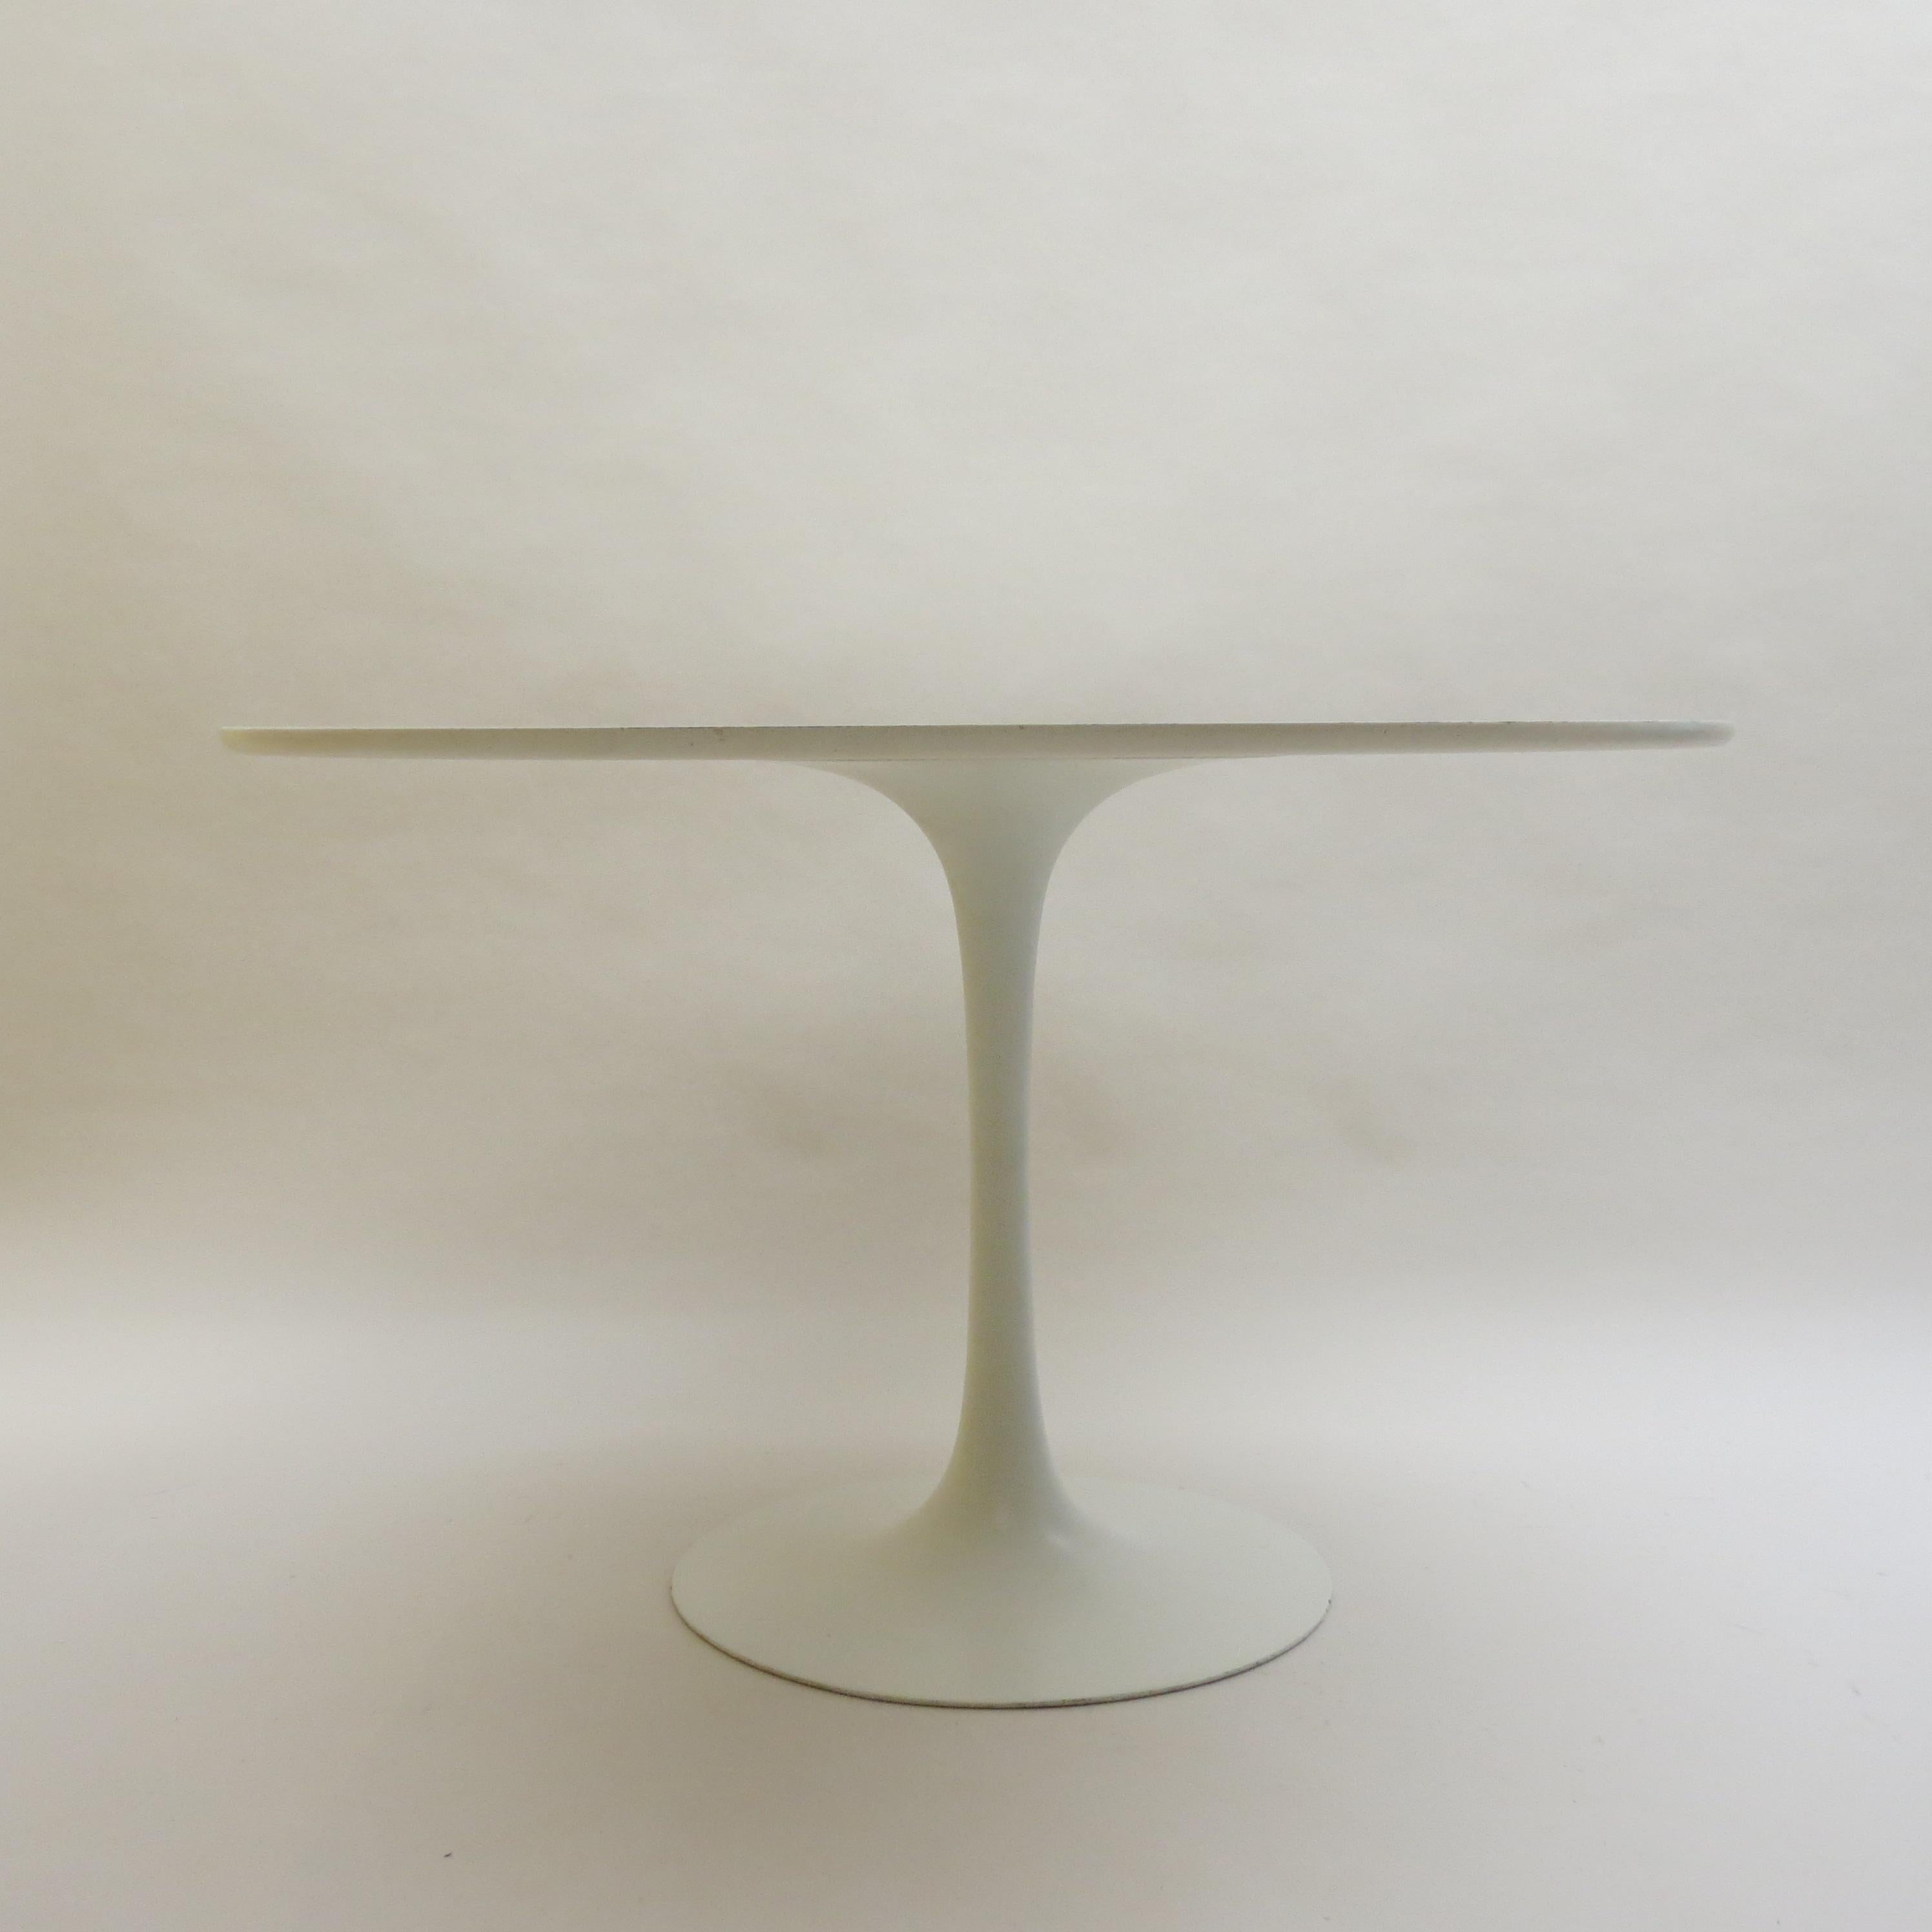 A large 1960s tulip dining table designed by Maurice Burke and manufactured by Arkana, Bath, UK.

The base is made from cast Aluminium and is painted white, the top is made from white Formica. 

In good vintage condition, with minimal signs of